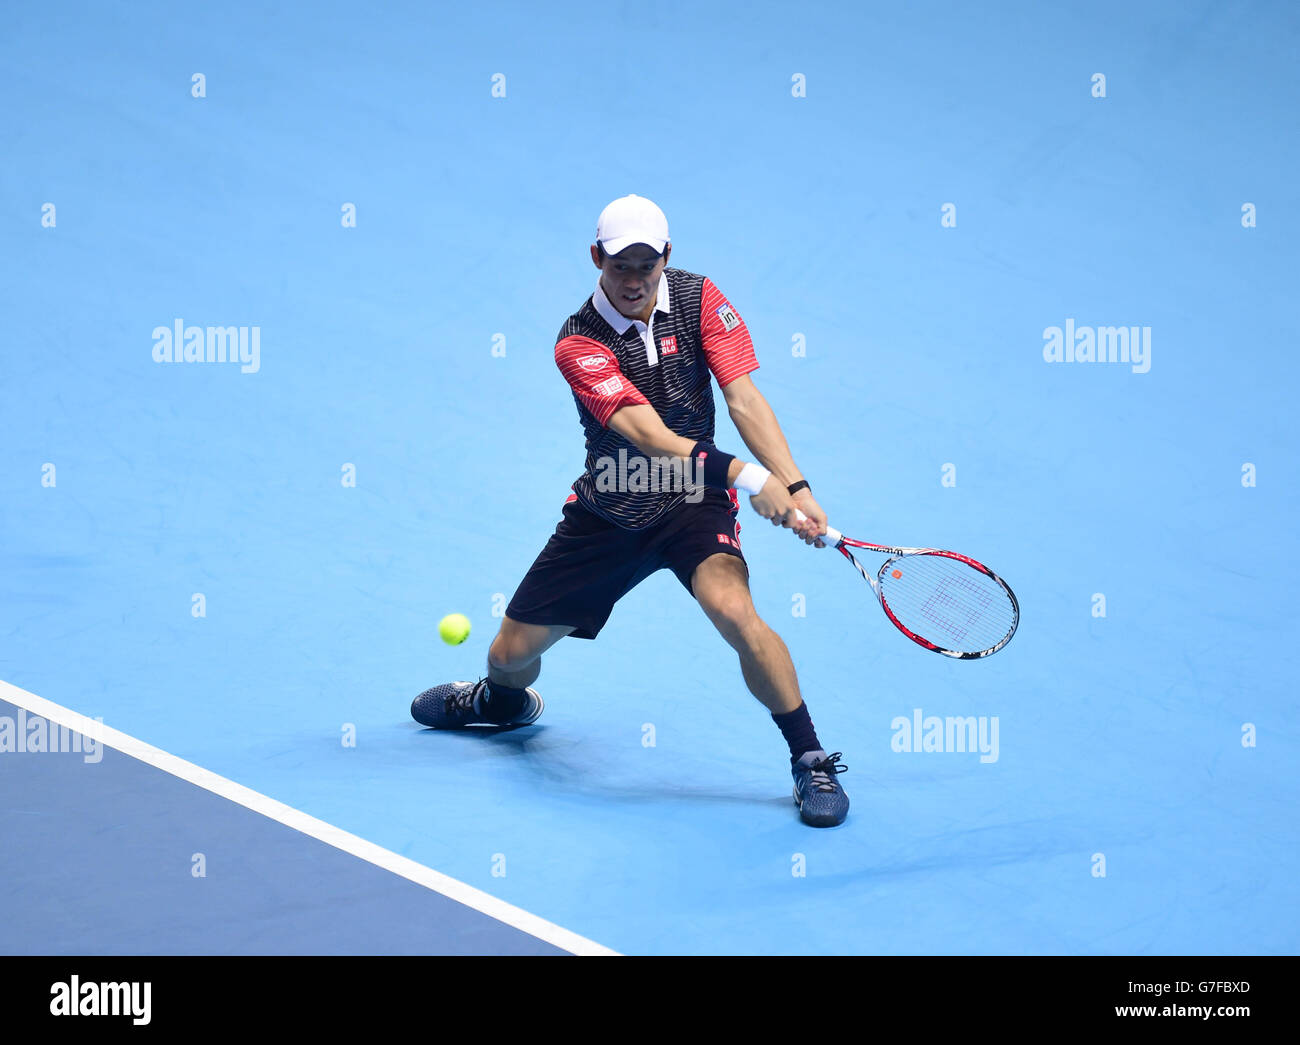 Japan's Kei Nishikori in action against Switzerland's Roger Federer during the Barclays ATP World Tour Finals at The O2 Arena, London. PRESS ASSOCIATION Photo. Picture date: Tuesday November 11, 2014. See PA story TENNIS London. Photo credit should read Adam Davy/PA Wire. Stock Photo